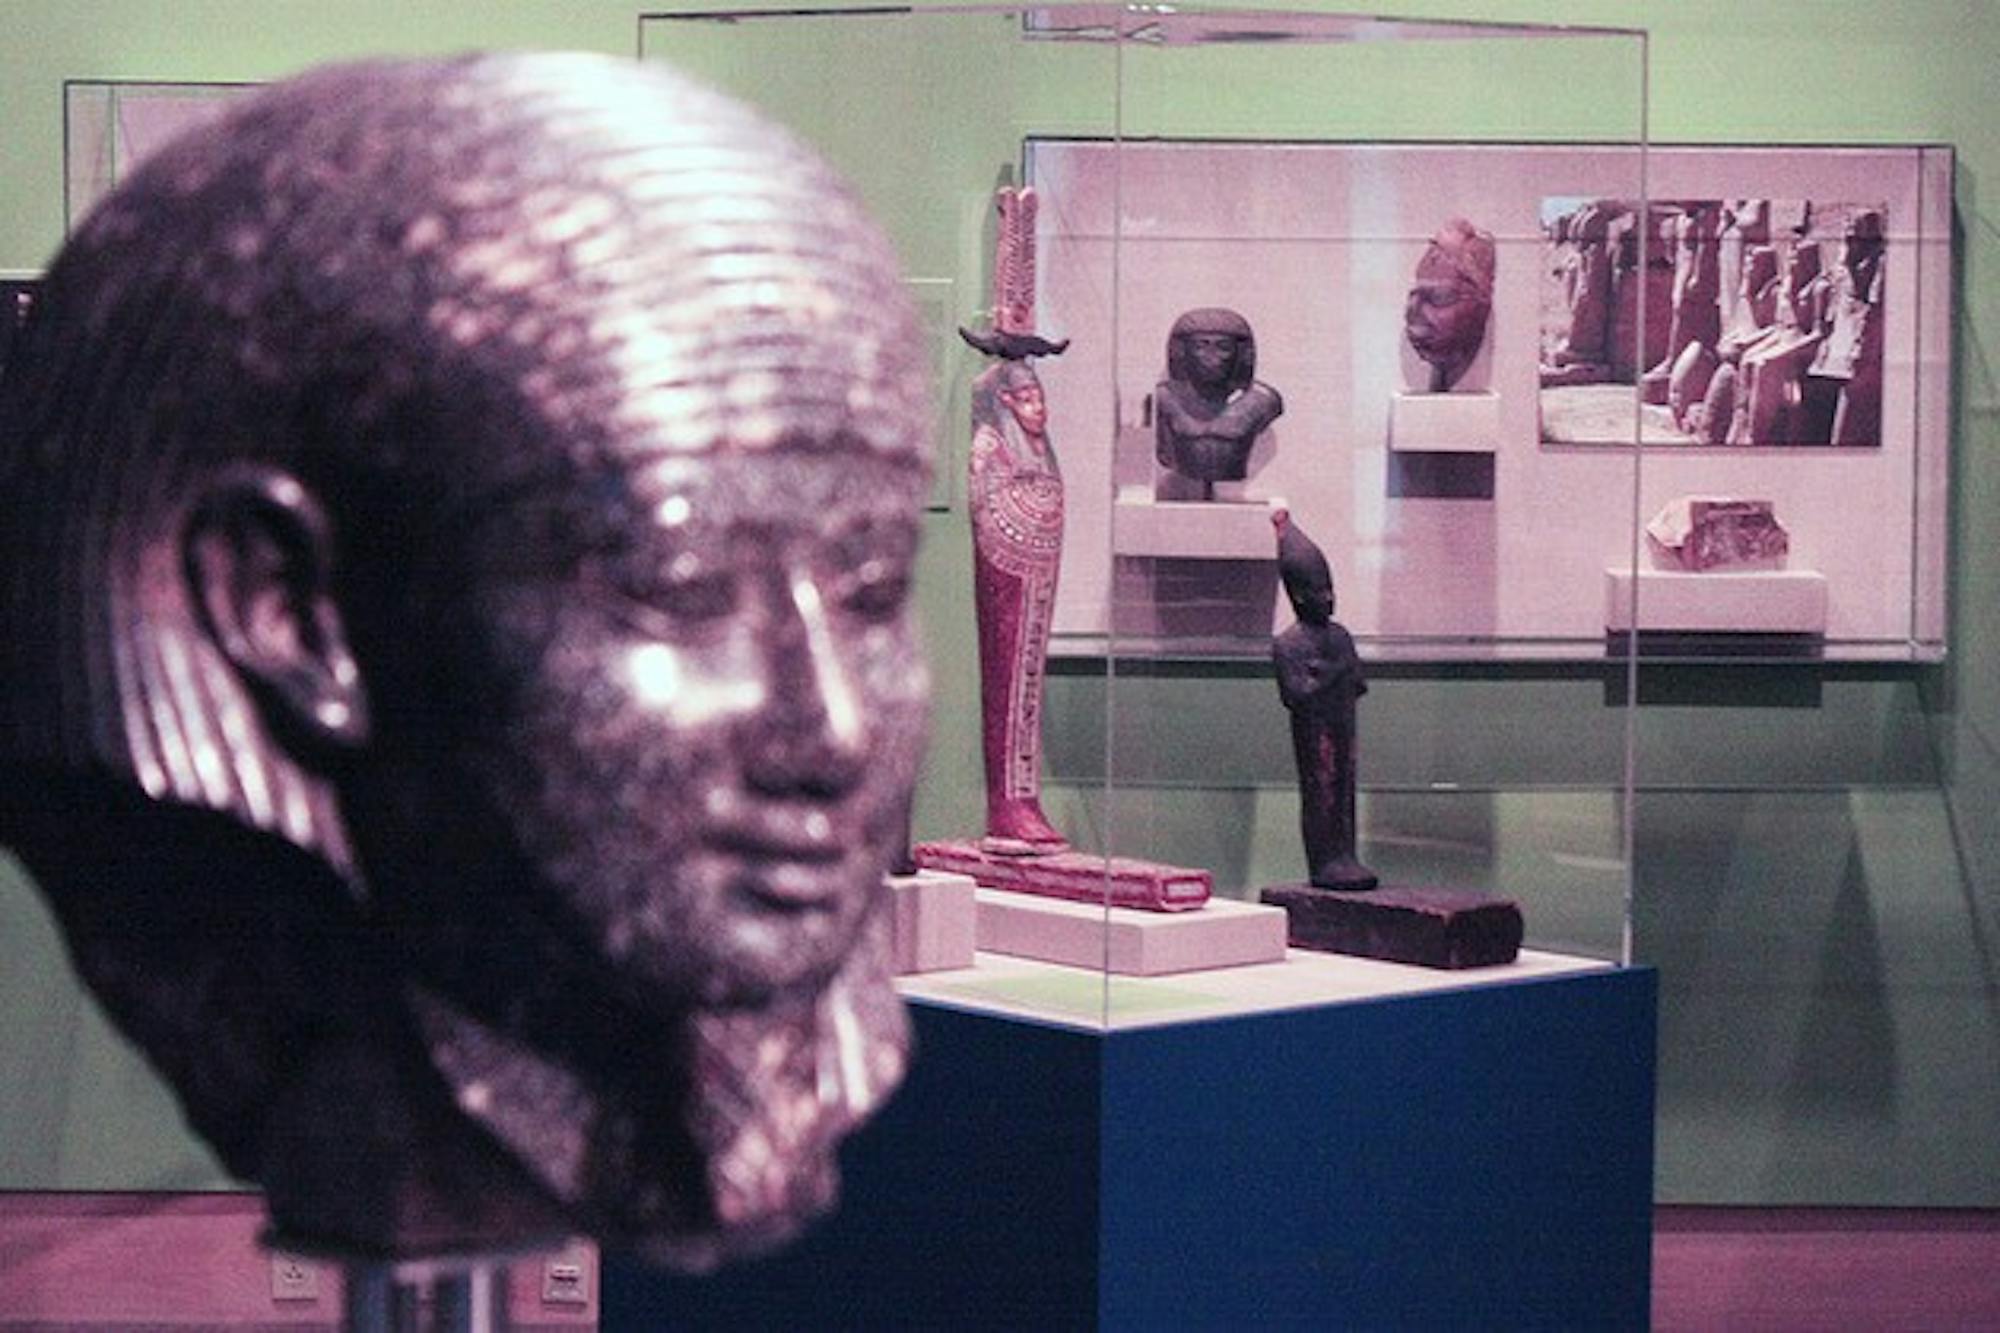 Dartmouth resident Egyptologist Christine Lilyquist has catalogued the Hood Museum's collection of Egyptian artifacts, which were formerly in storage.